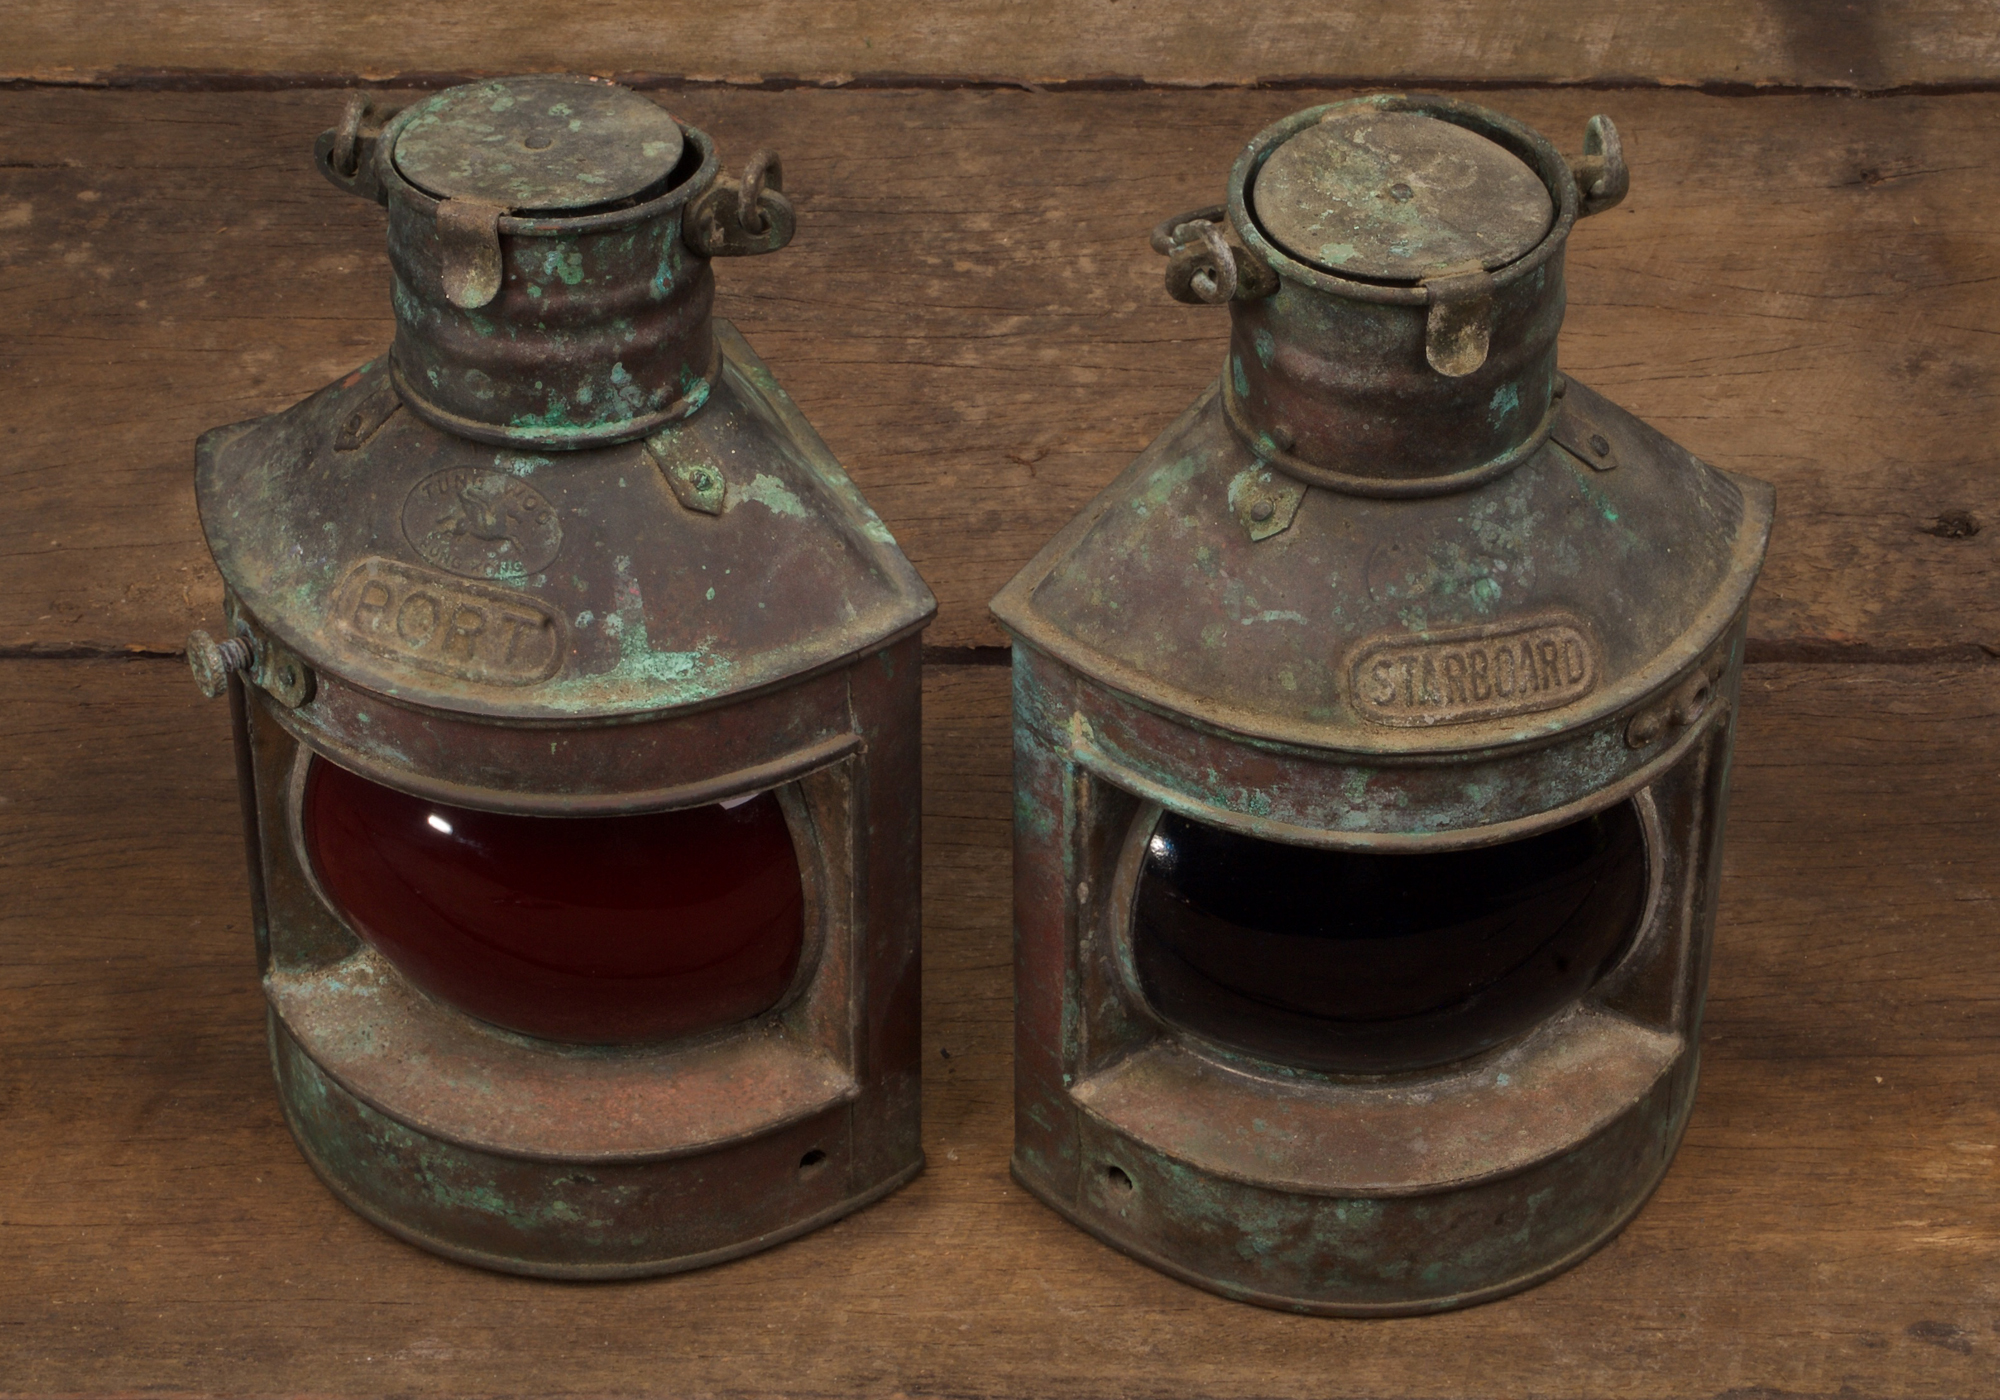  VINTAGE MATCHING PAIR OF CHINESE PORT & STARBOARD COPPER & BRASS LANTERNS